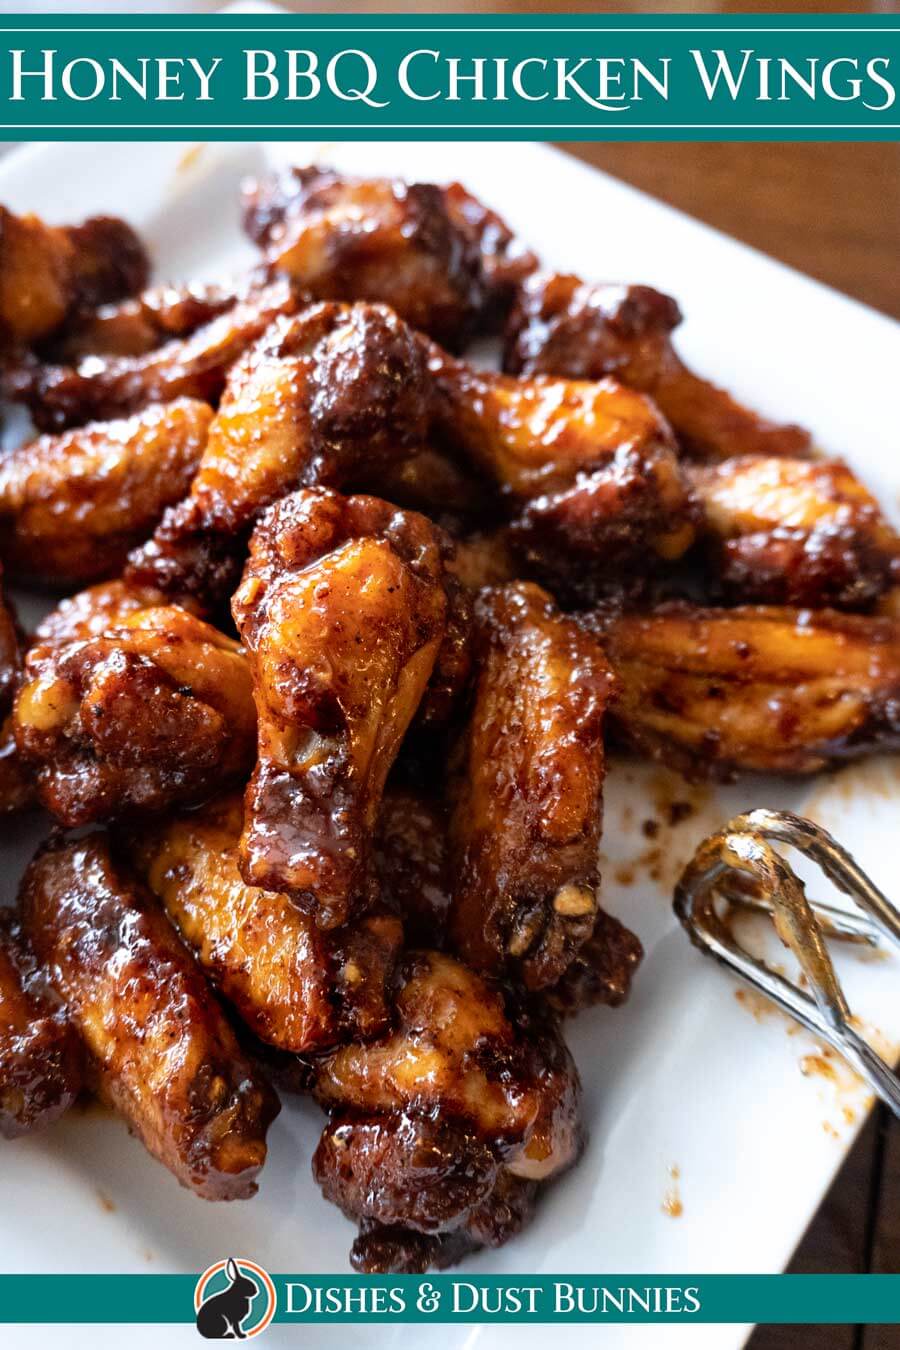 Honey BBQ Chicken Wings - Dishes & Dust Bunnies